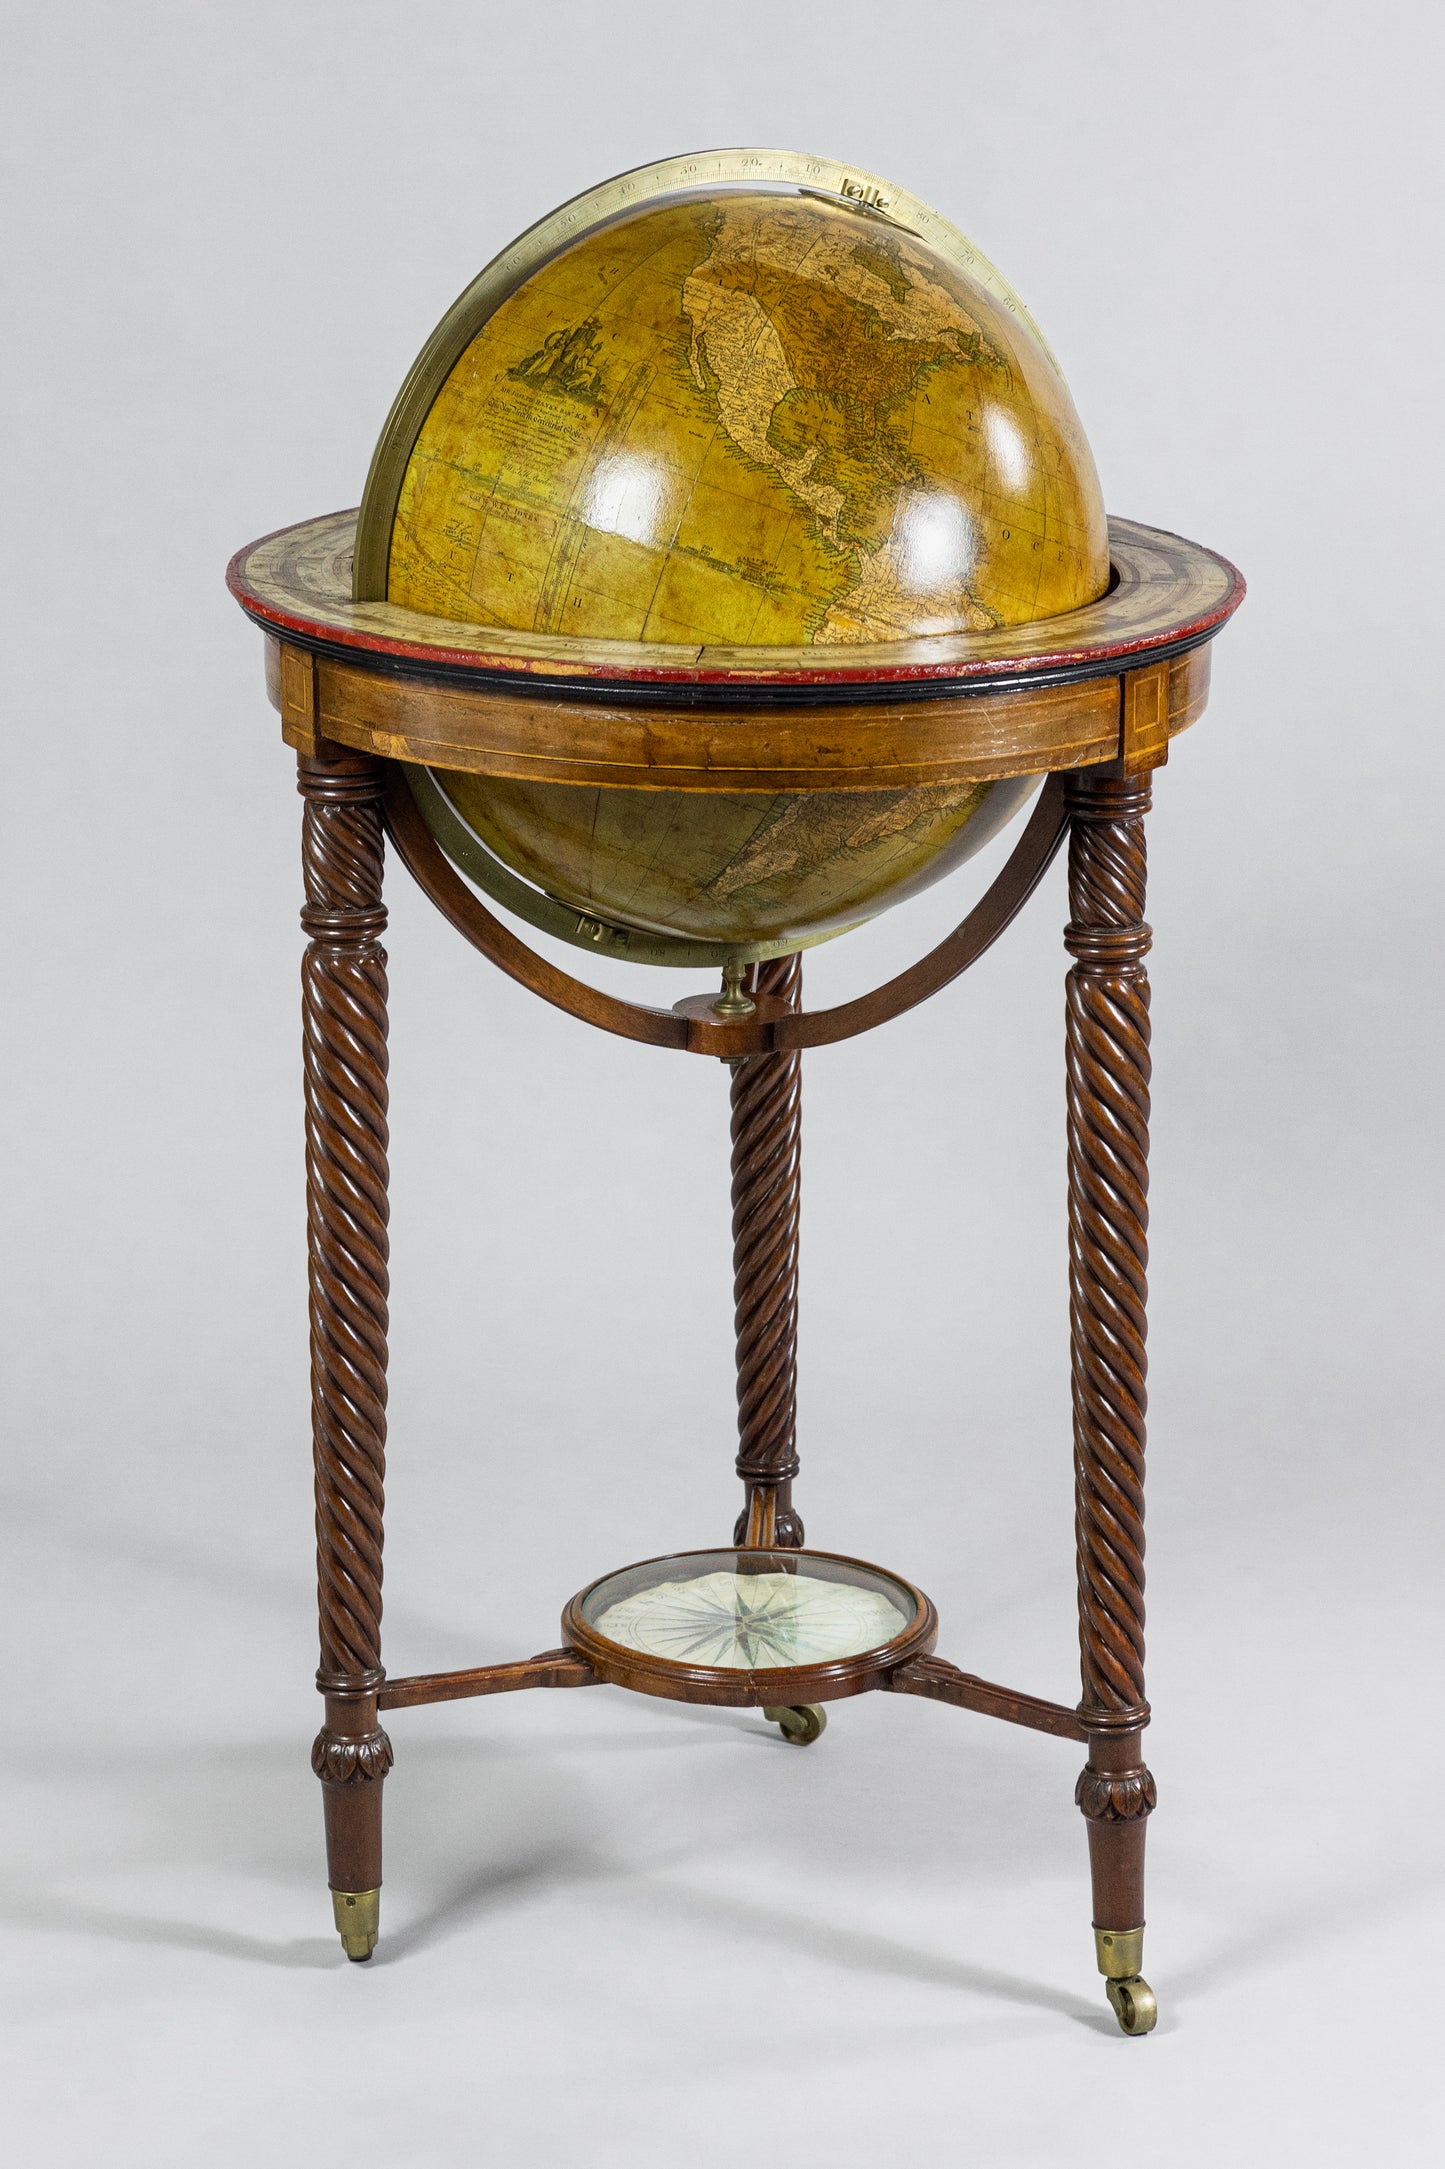 W. and T.M. BARDIN (fl. 1783 – 1819) Sold by W. and S. Jones (fl. 1791 – 1859)   The New British Terrestrial Globe containing all the latest discoveries… engraved from an accurate drawing by Mr. Arrowsmith. London, 1829.